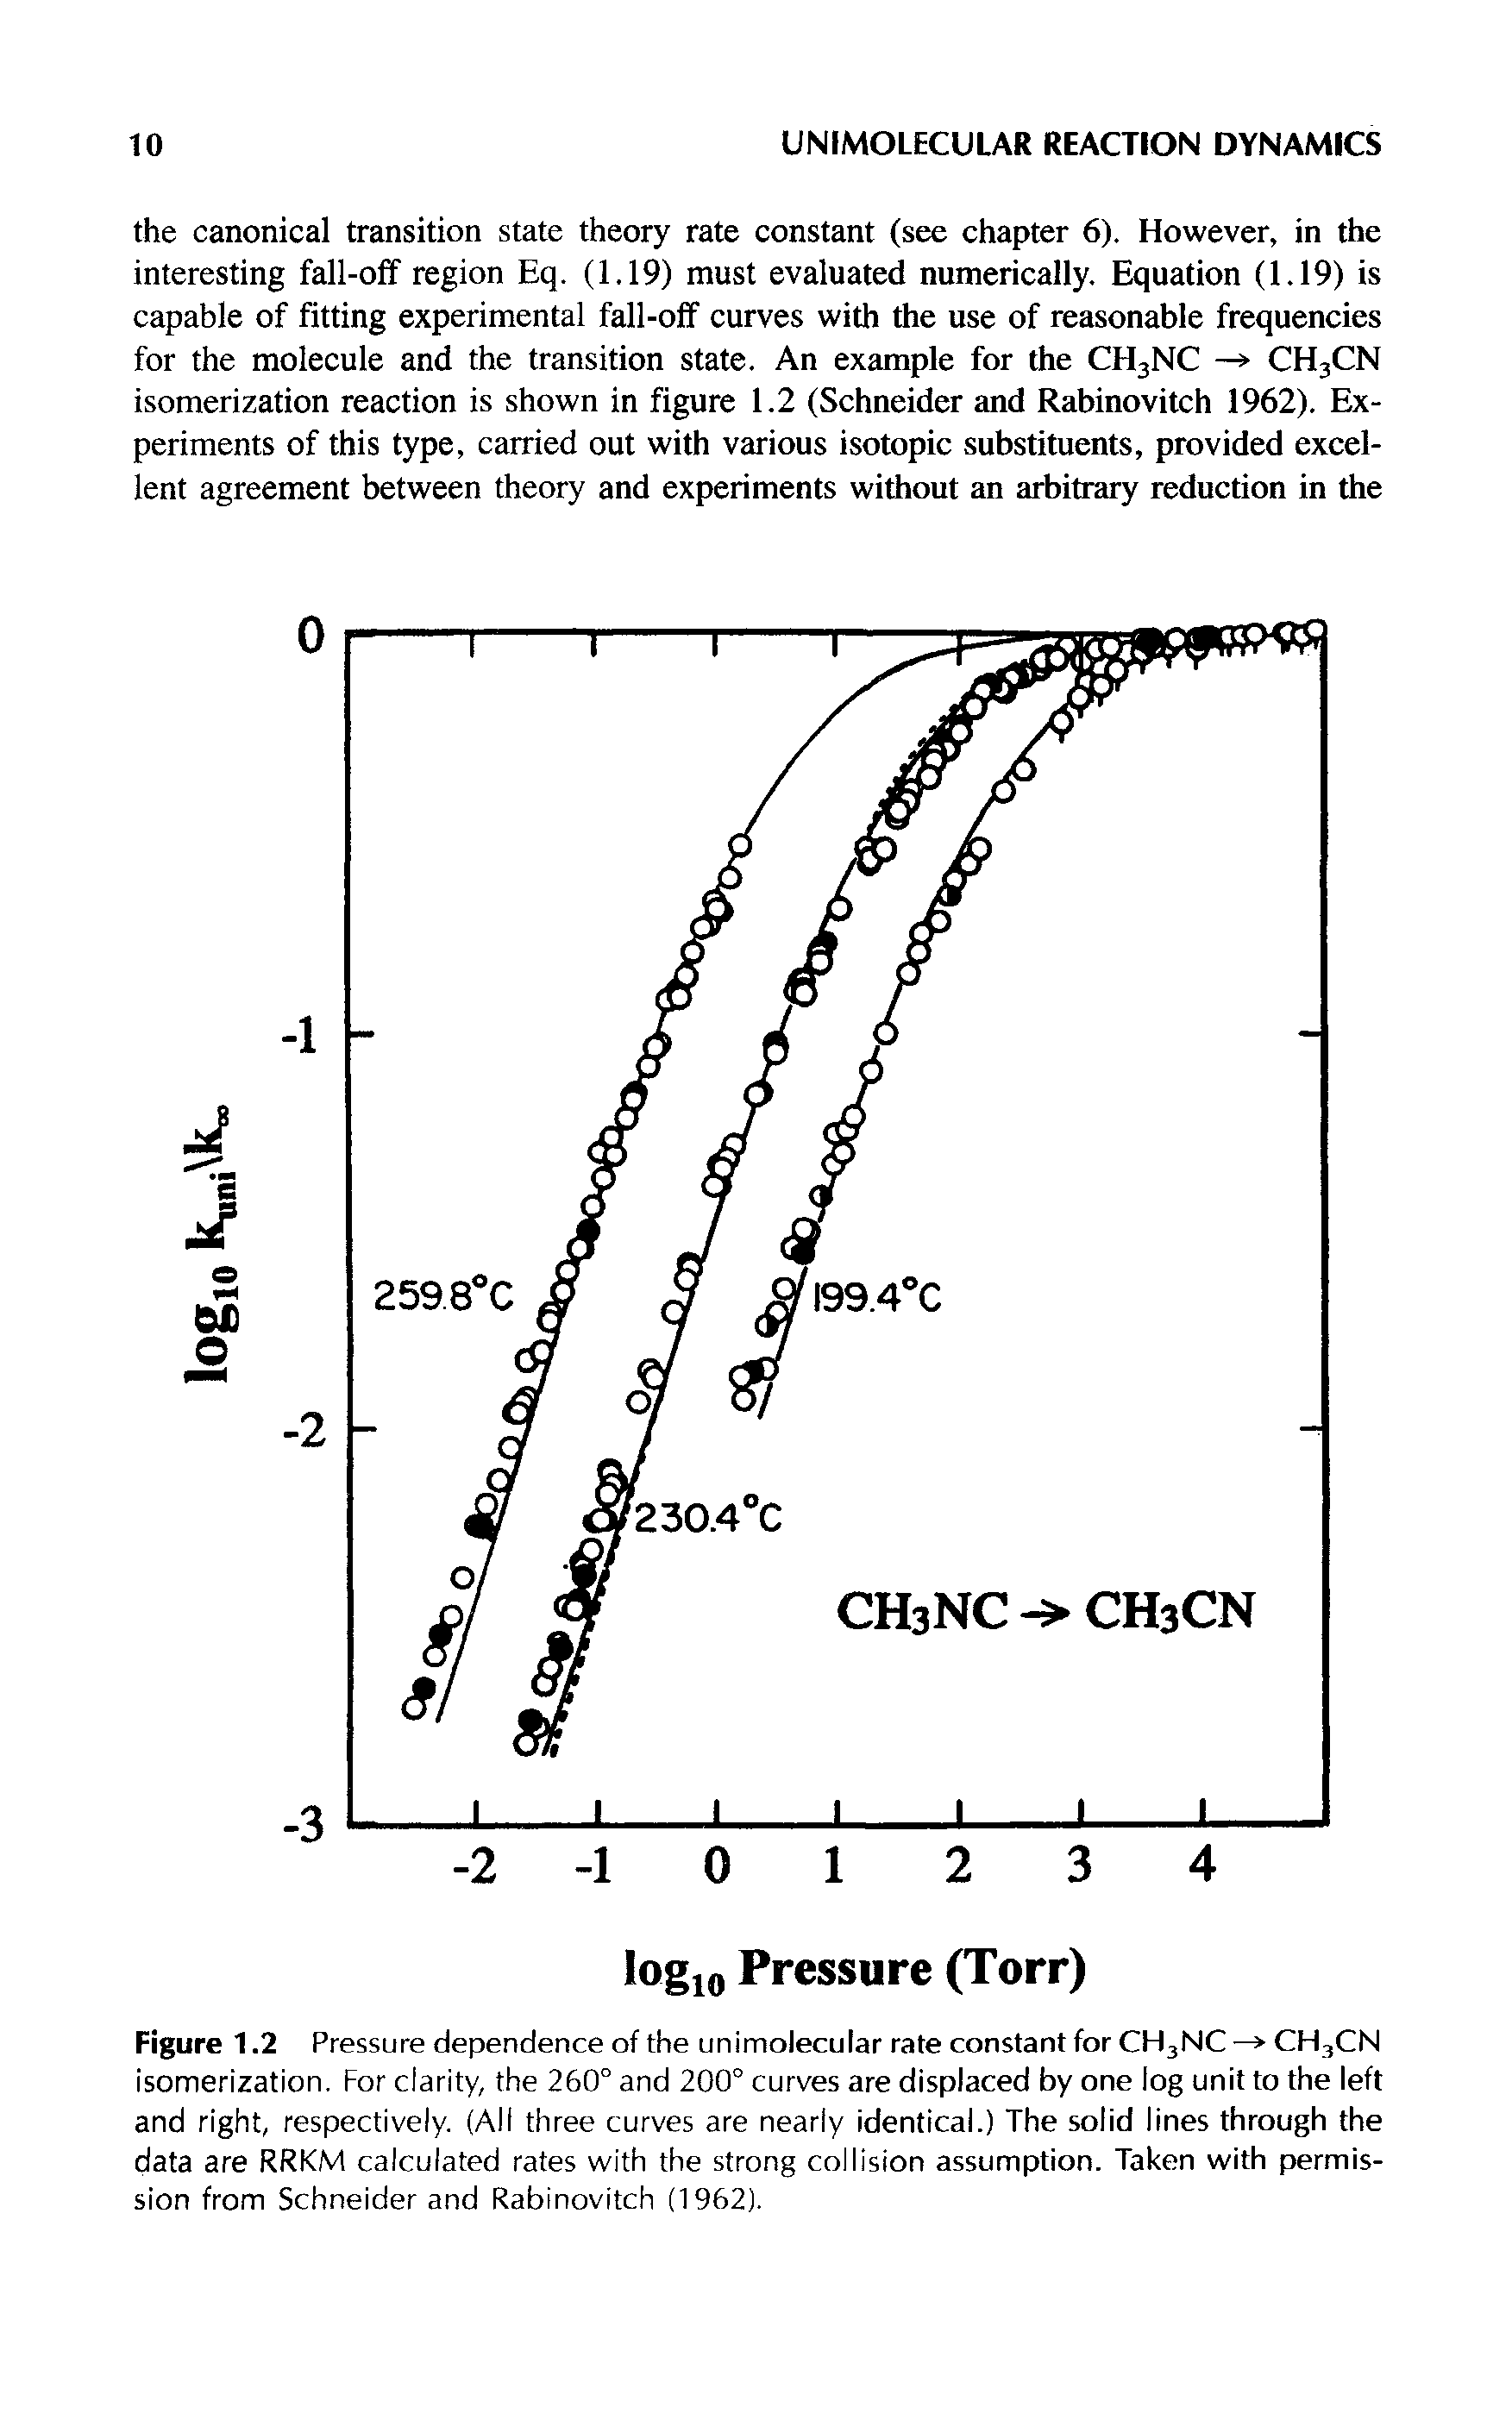 Figure 1.2 Pressure dependence of the unimolecular rate constant for CH3NC CH3CN isomerization. For clarity, the 260° and 200° curves are displaced by one log unit to the left and right, respectively. (All three curves are nearly identical.) The solid lines through the data are RRKM calculated rates with the strong collision assumption. Taken with permission from Schneider and Rabinovitch (1962).